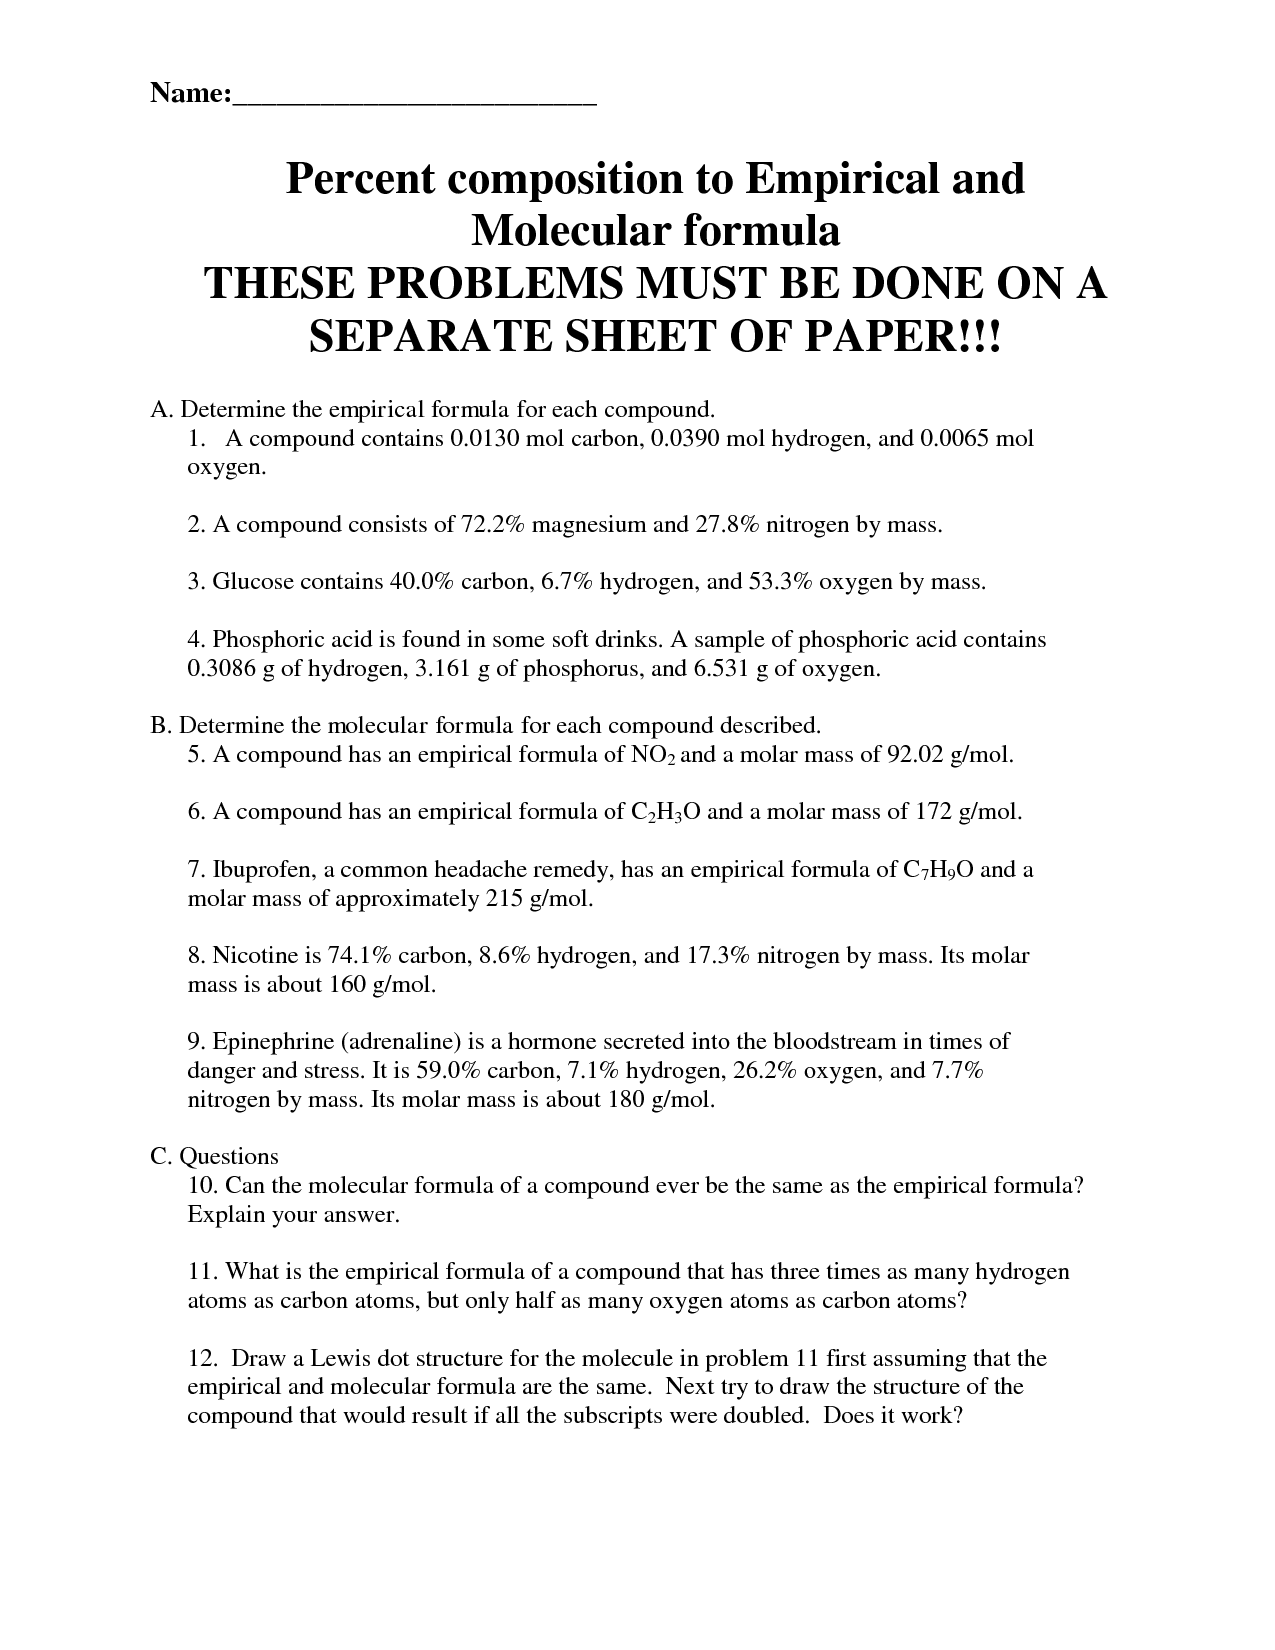 12 Best Images of Empirical Formula Worksheet With Answers  Molecular and Empirical Formula 